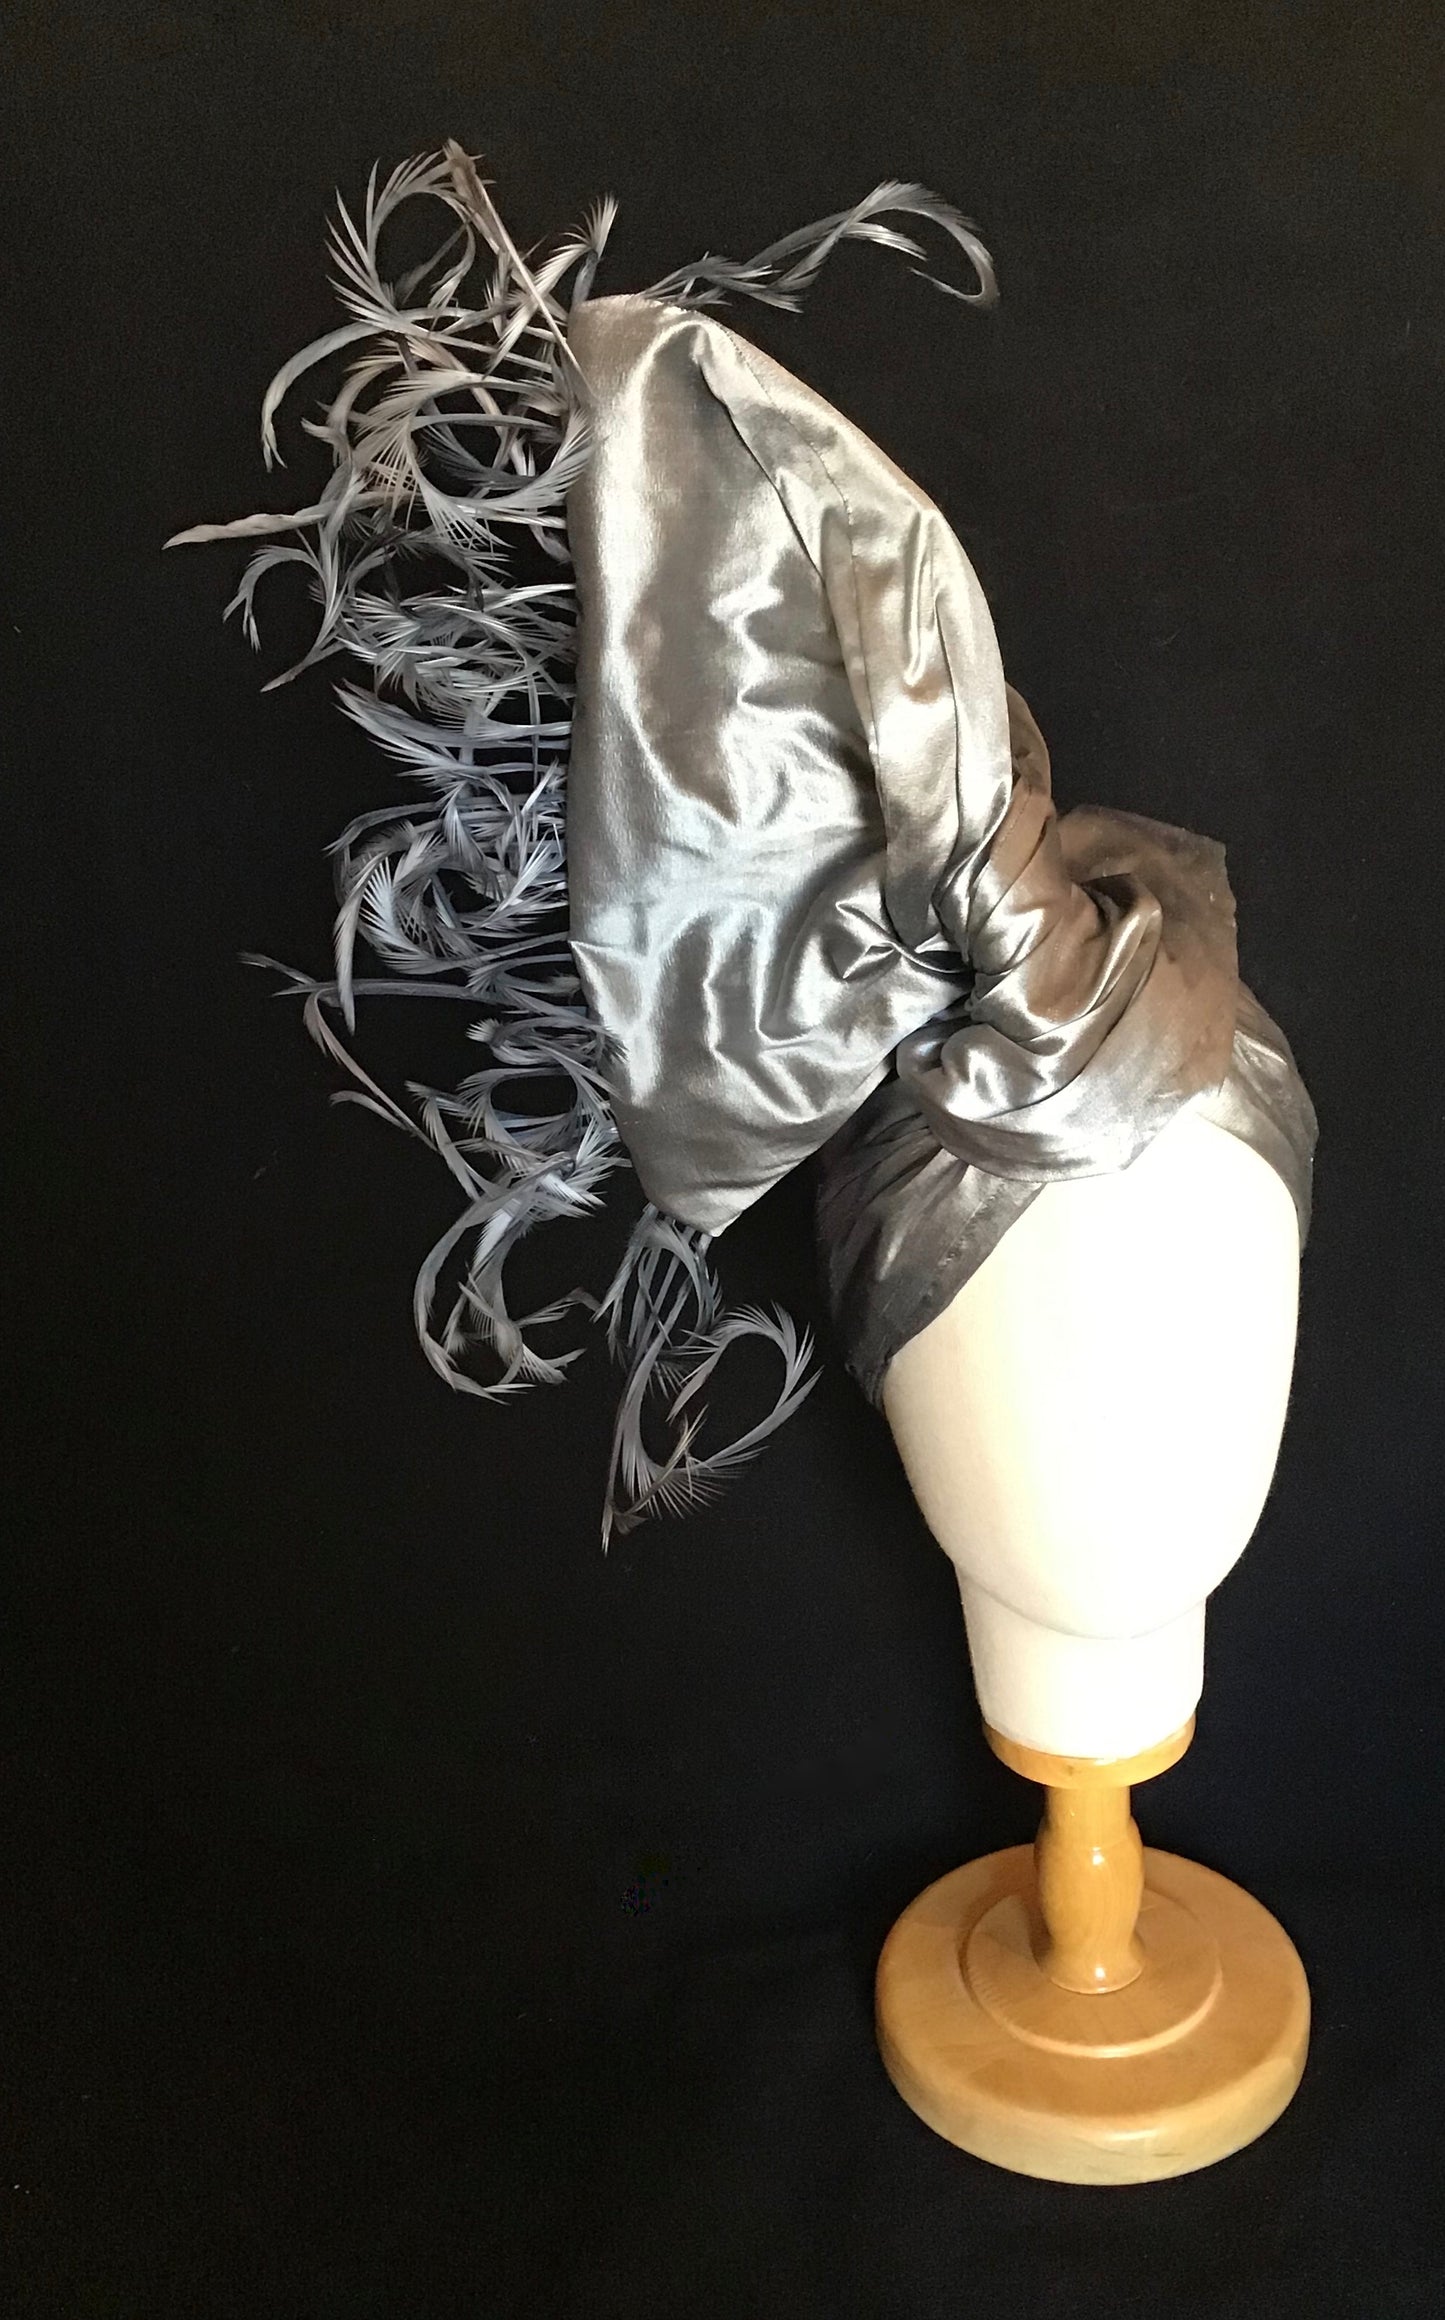 Silk shantung with pin feathers in silver